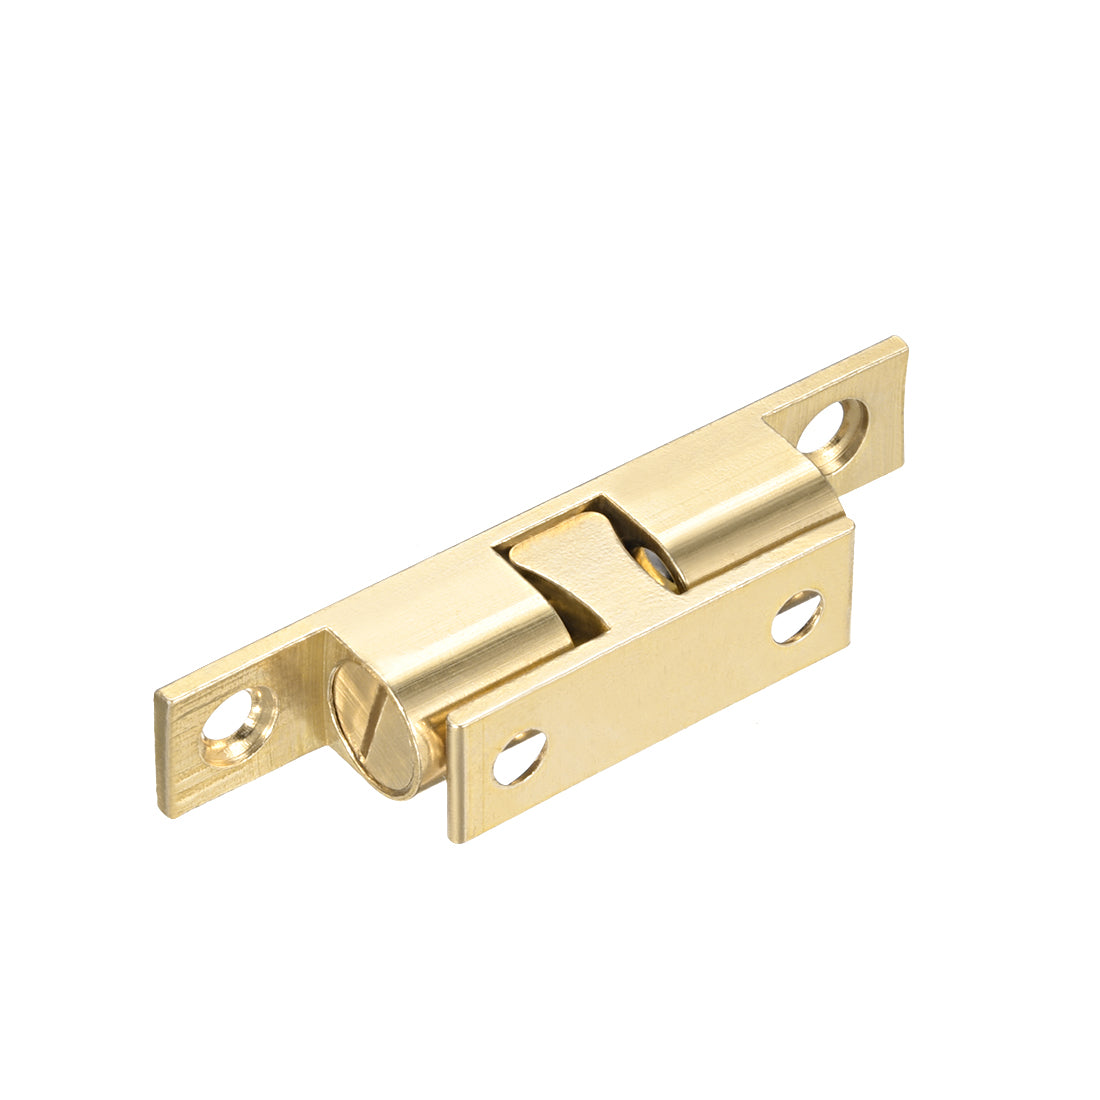 uxcell Uxcell Cabinet Door Closet Brass Double Ball Catch Tension Latch 70mm Length Gold Tone 5pcs